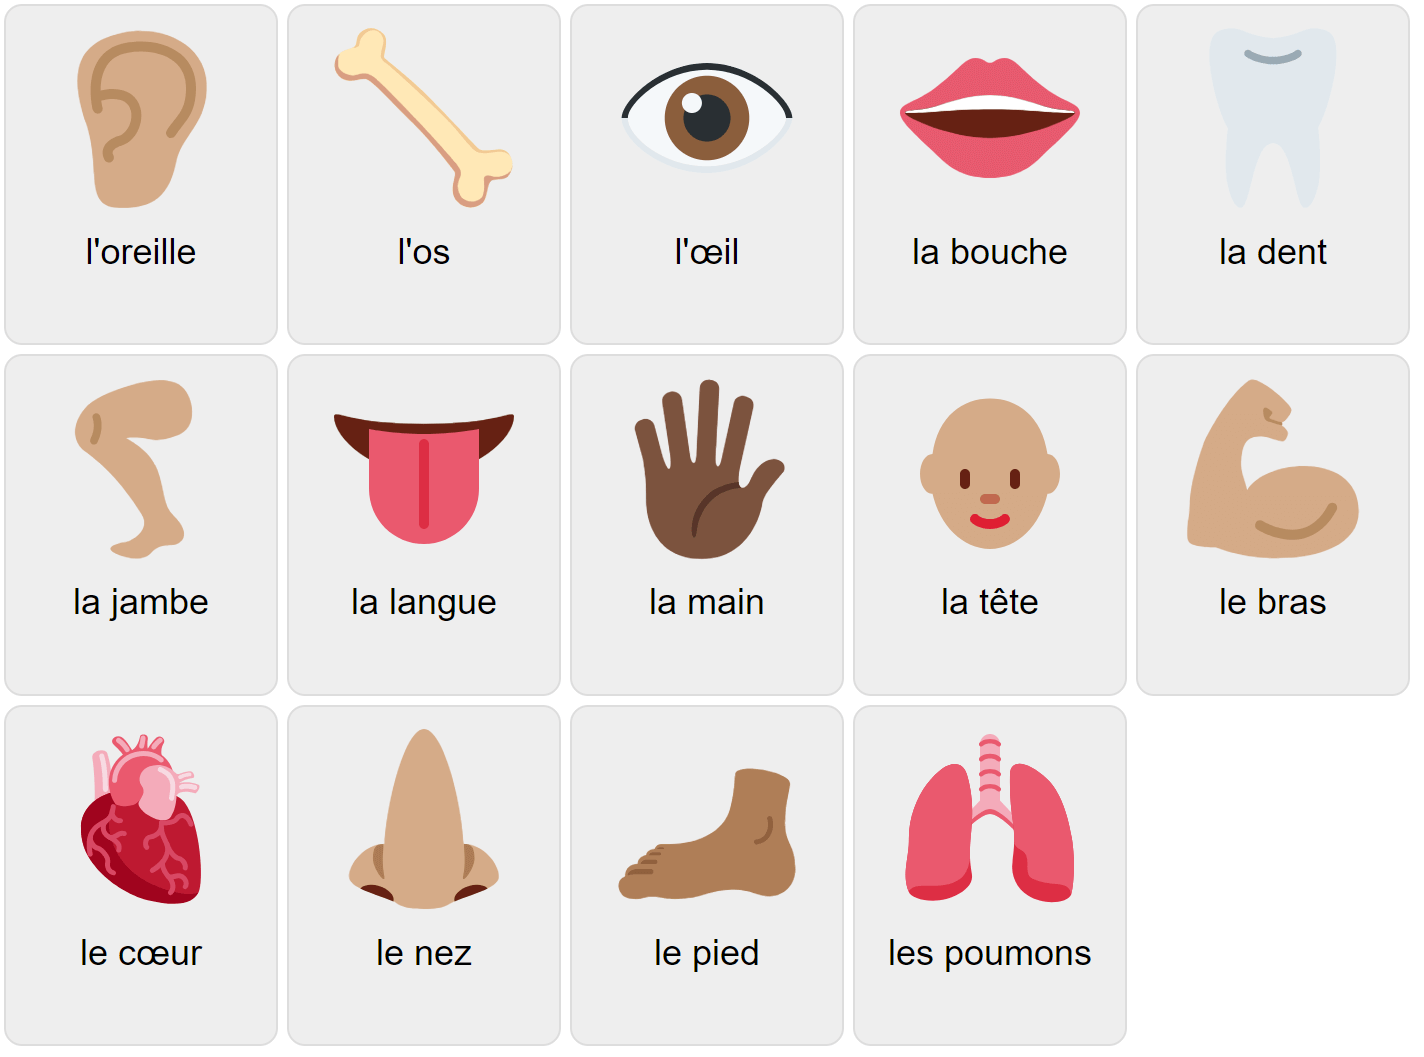 Body Parts in French